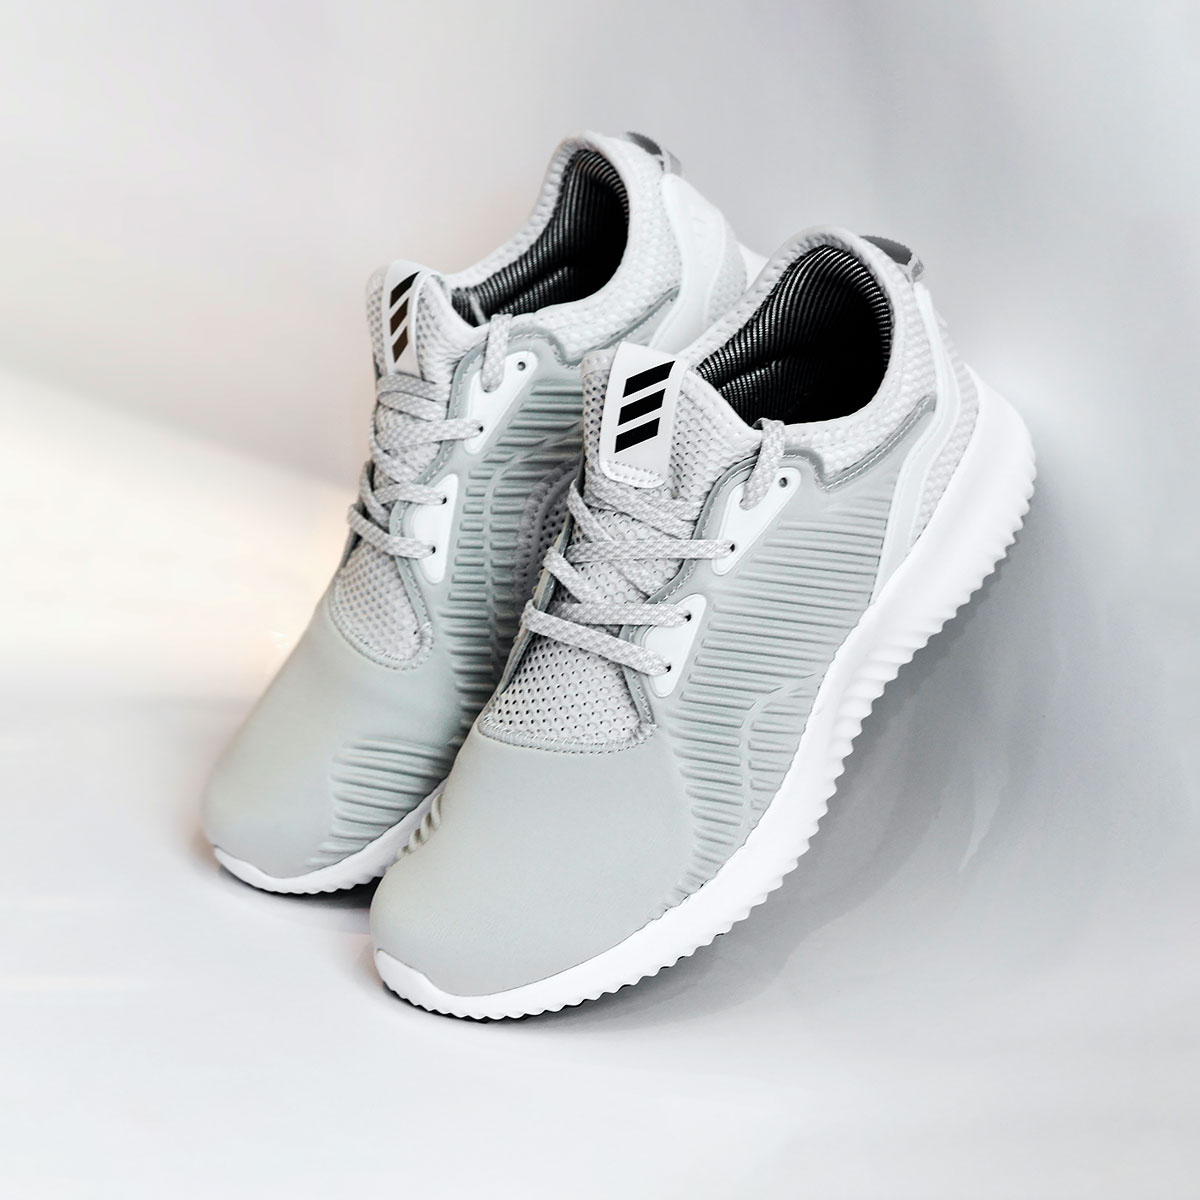 Puma Fitness Shoes in Grey